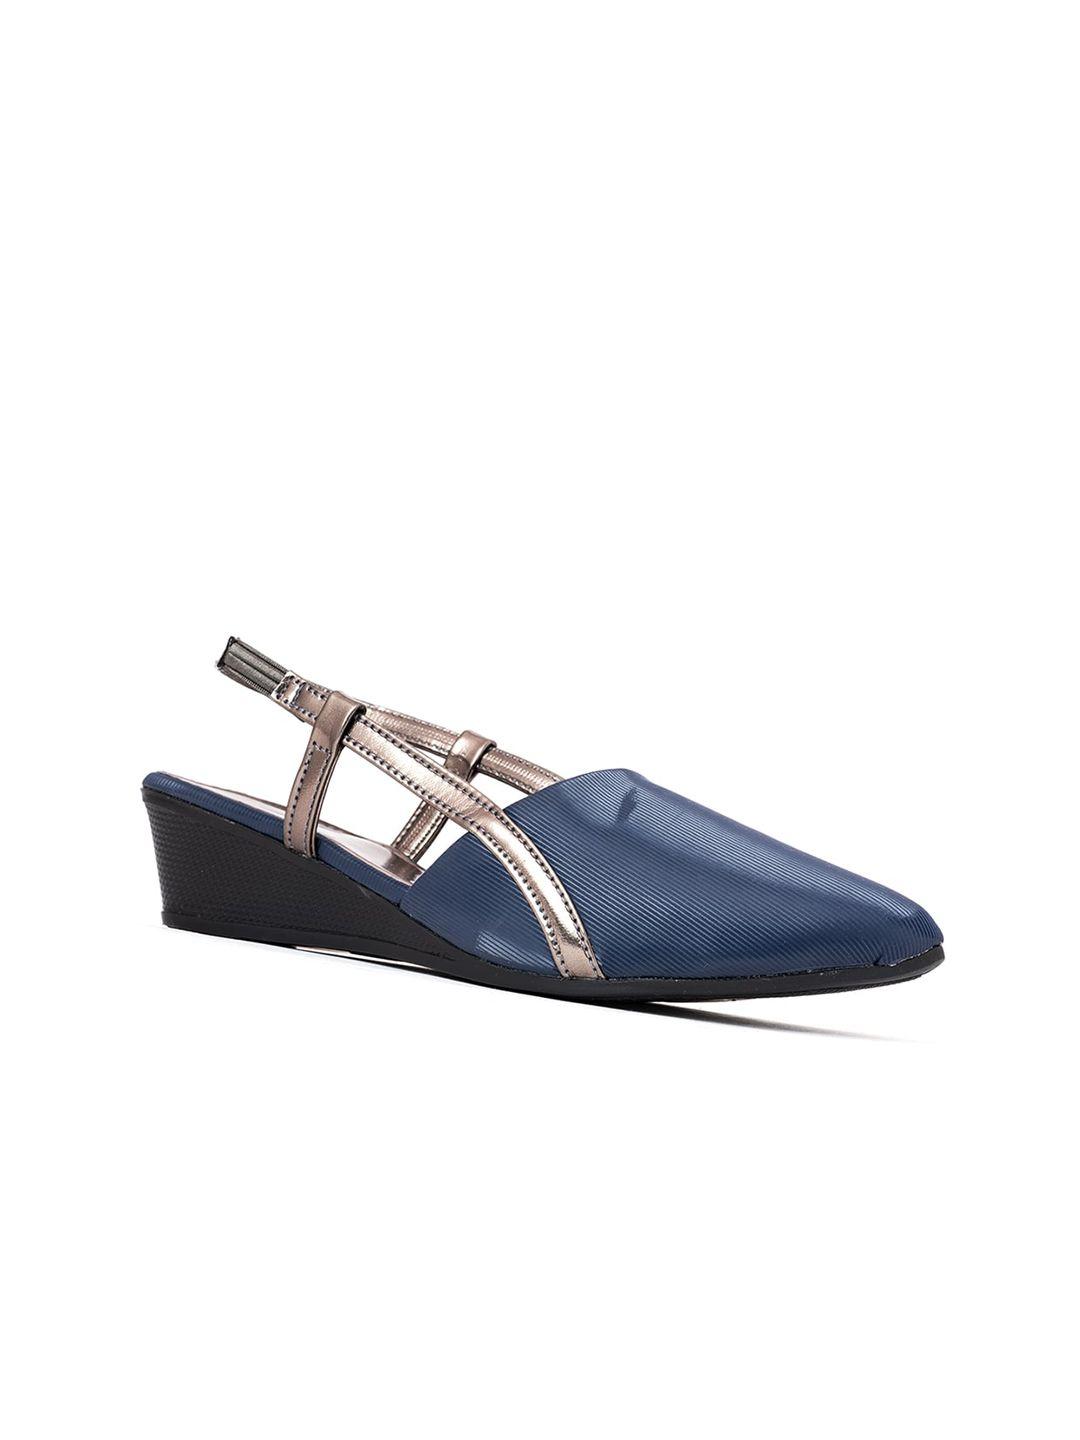 khadims navy blue colourblocked wedge pumps with buckles